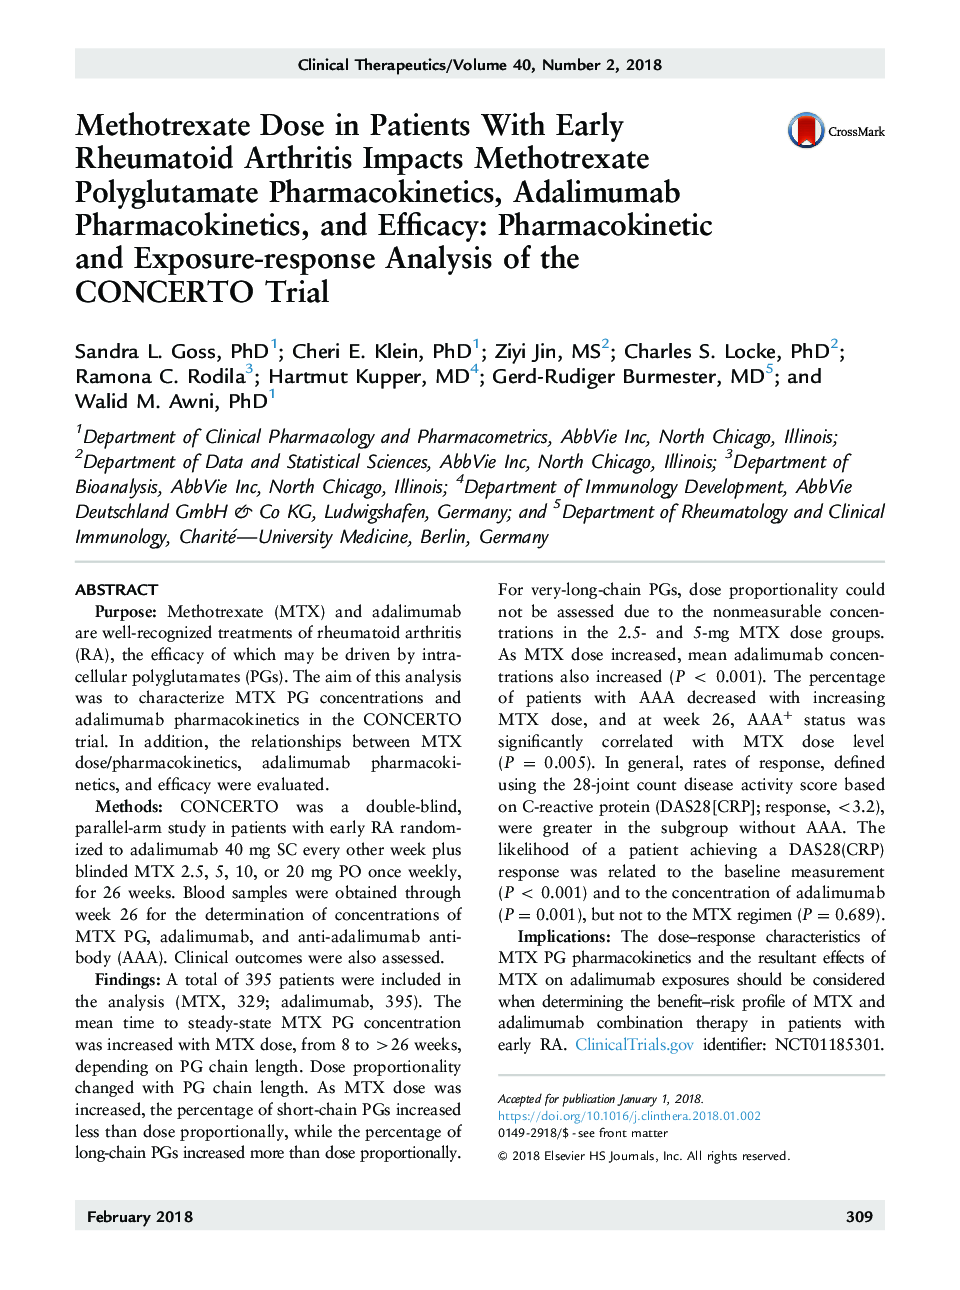 Methotrexate Dose in Patients With Early Rheumatoid Arthritis Impacts Methotrexate Polyglutamate Pharmacokinetics, Adalimumab Pharmacokinetics, and Efficacy: Pharmacokinetic and Exposure-response Analysis of the CONCERTO Trial